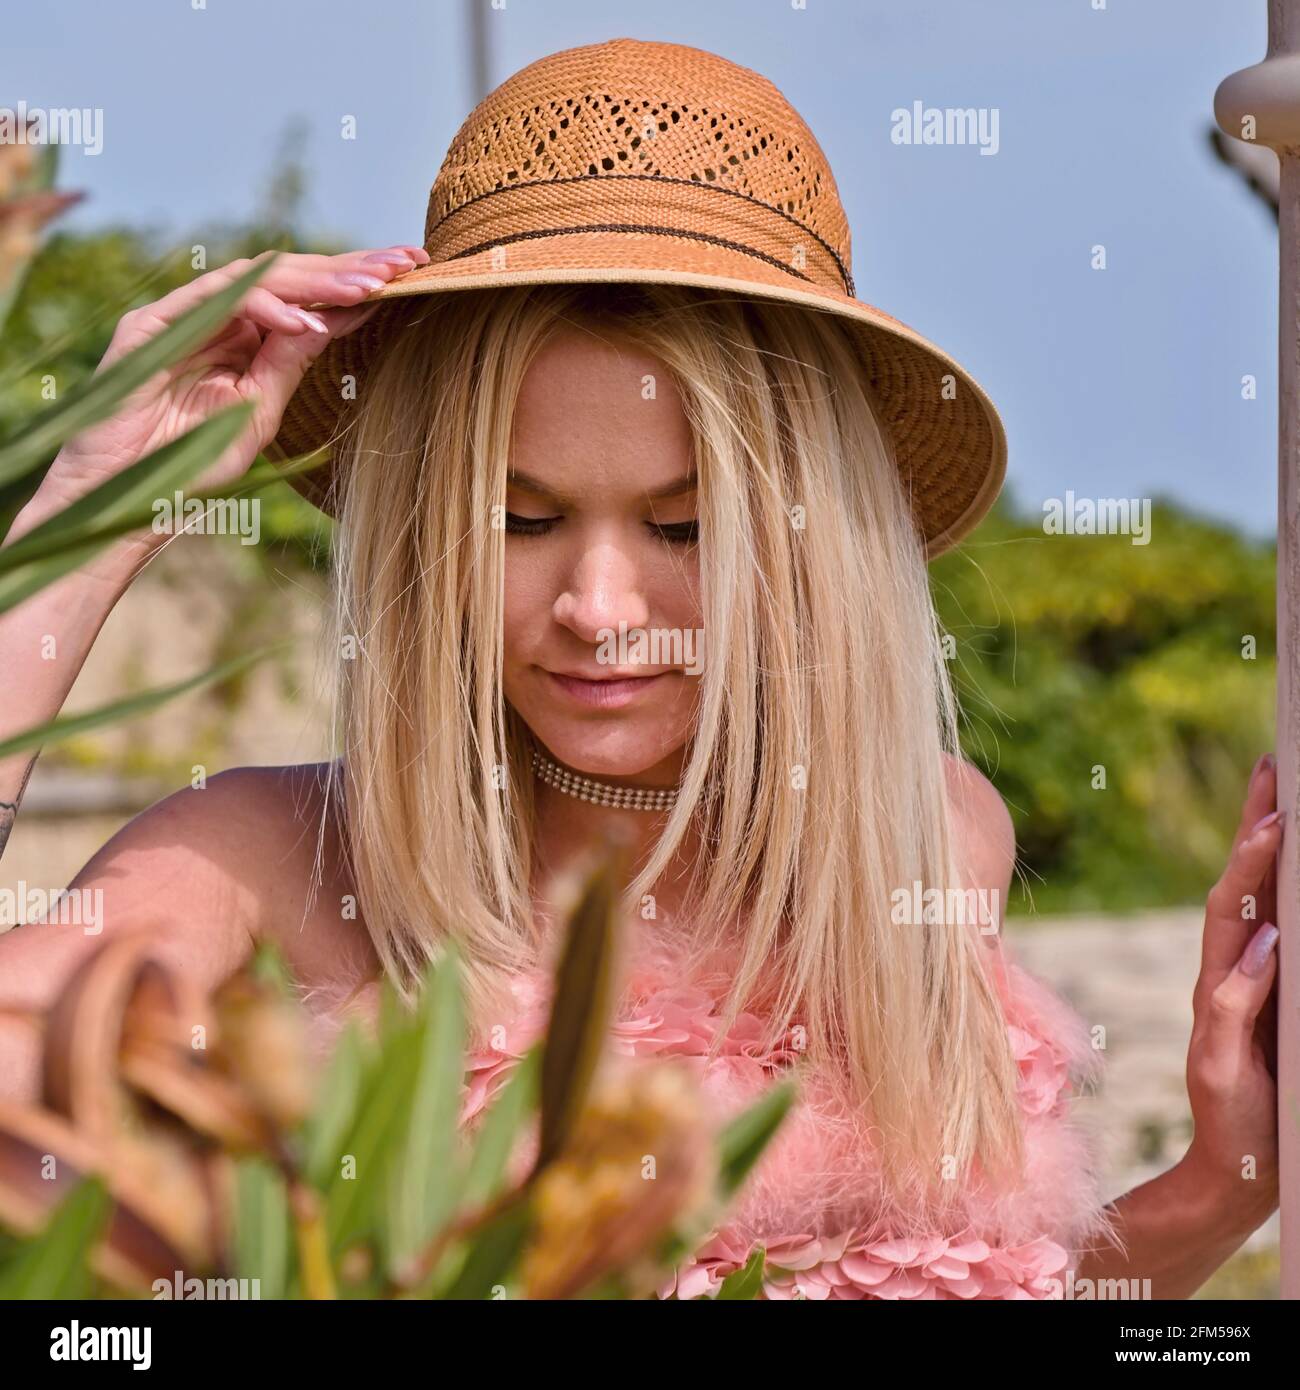 A young girl with long blonde hair is stnding in a flower bed. She is wearing a sun hat and her right arm is over the hat, looking down. She waers a r Stock Photo